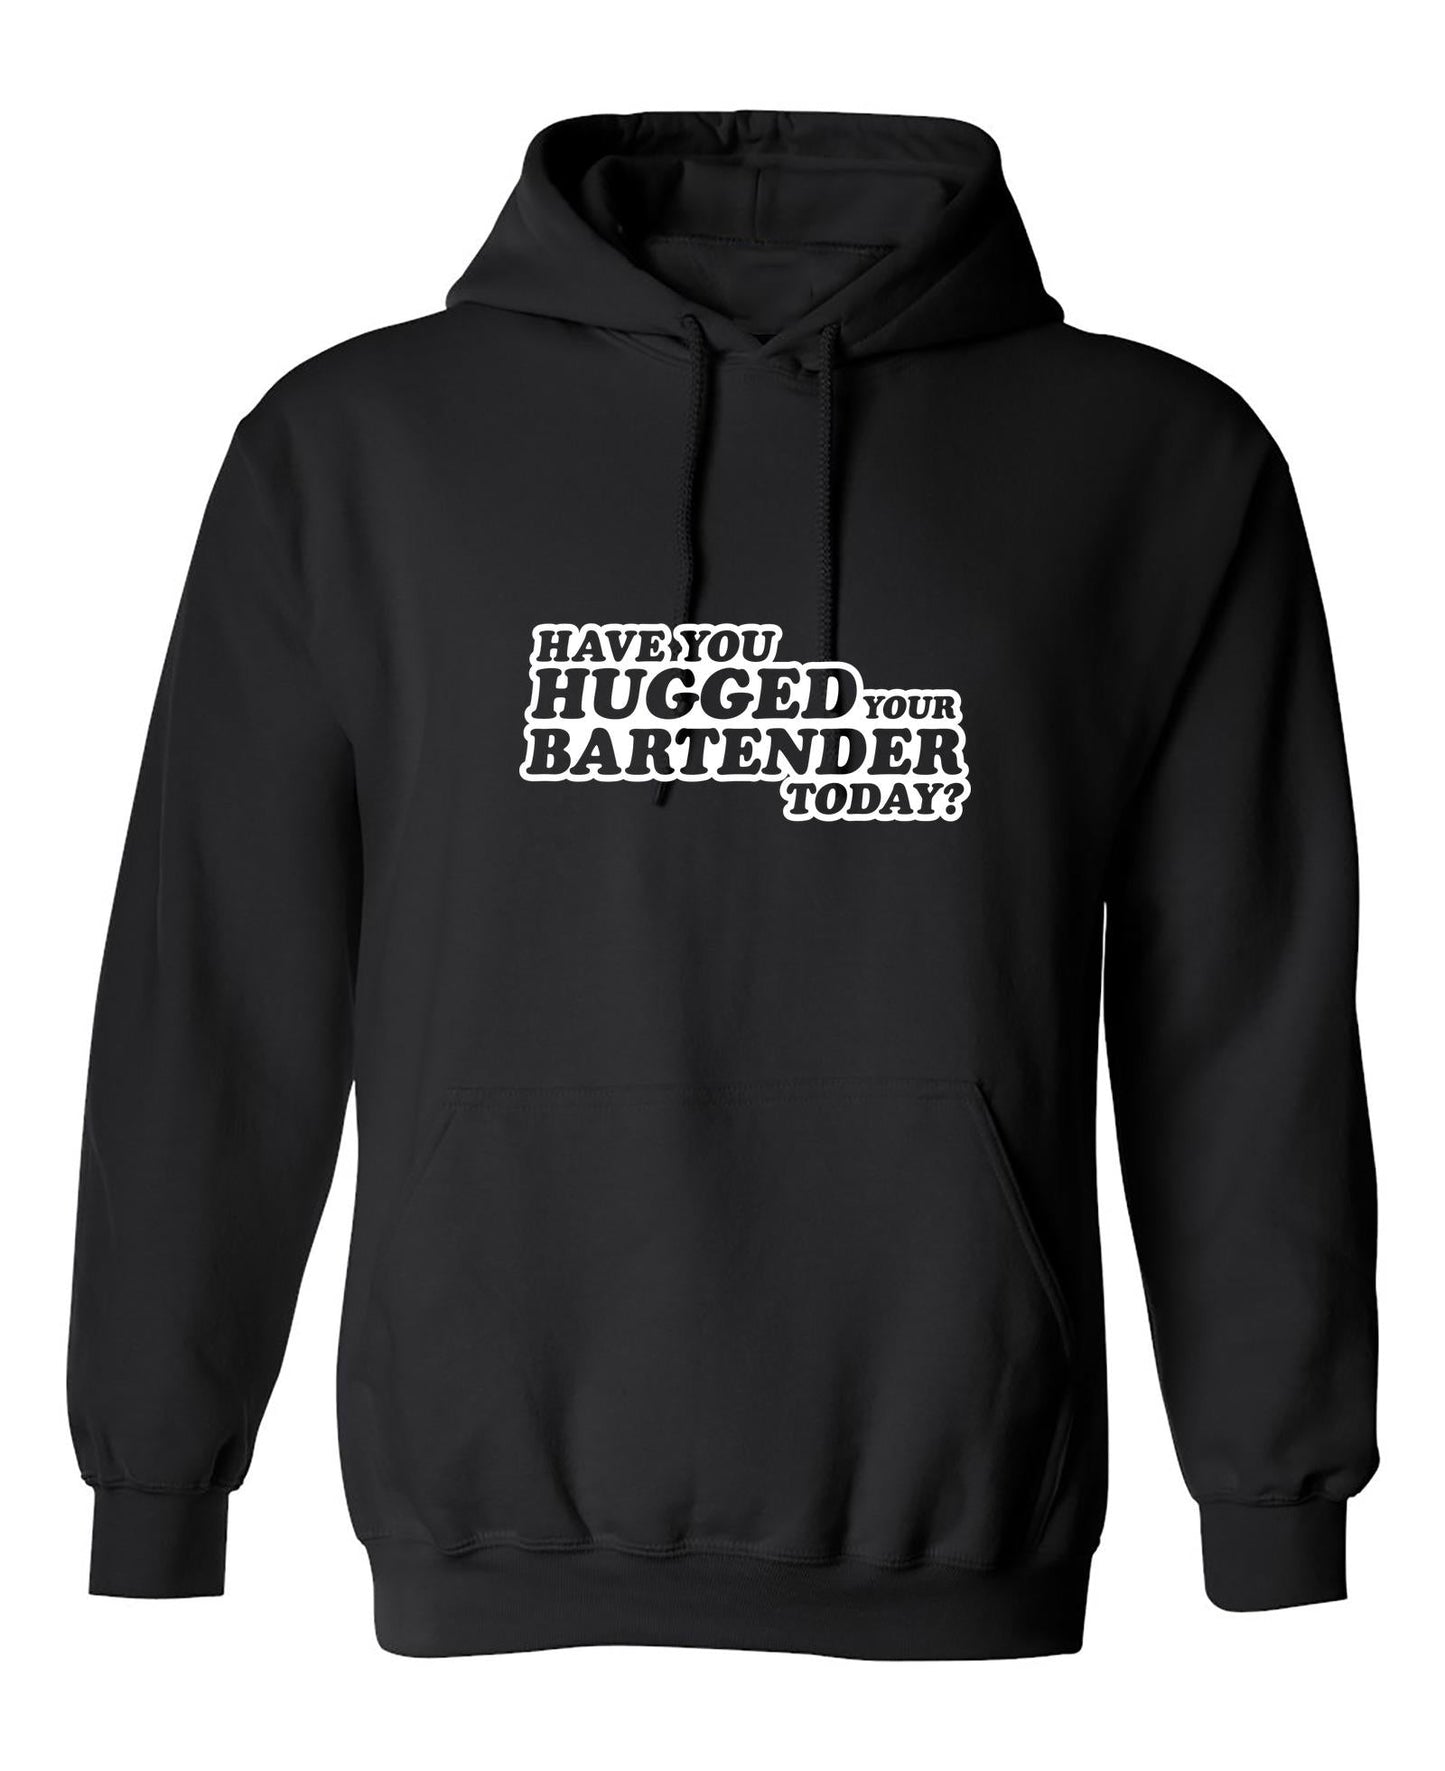 Funny T-Shirts design "Have You Hugged Your Bartender Today"